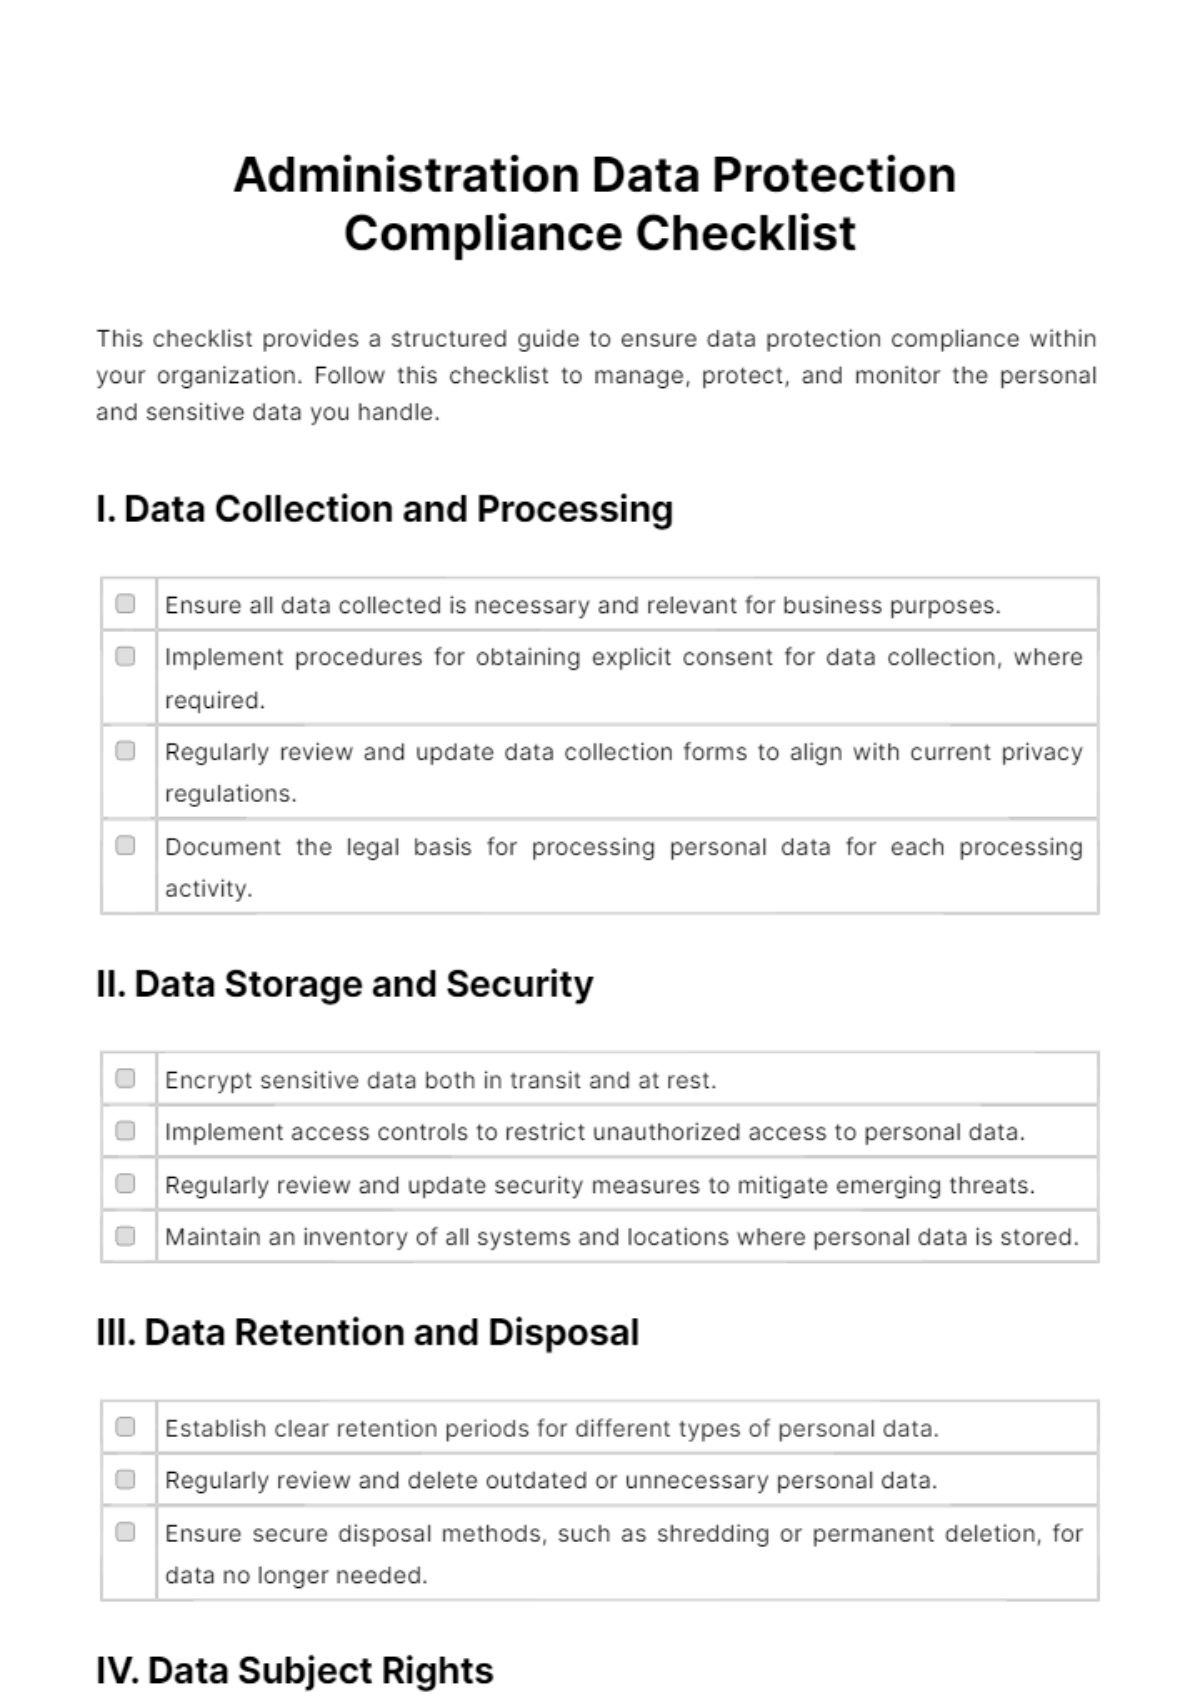 Free Administration Data Protection Compliance Checklist Template